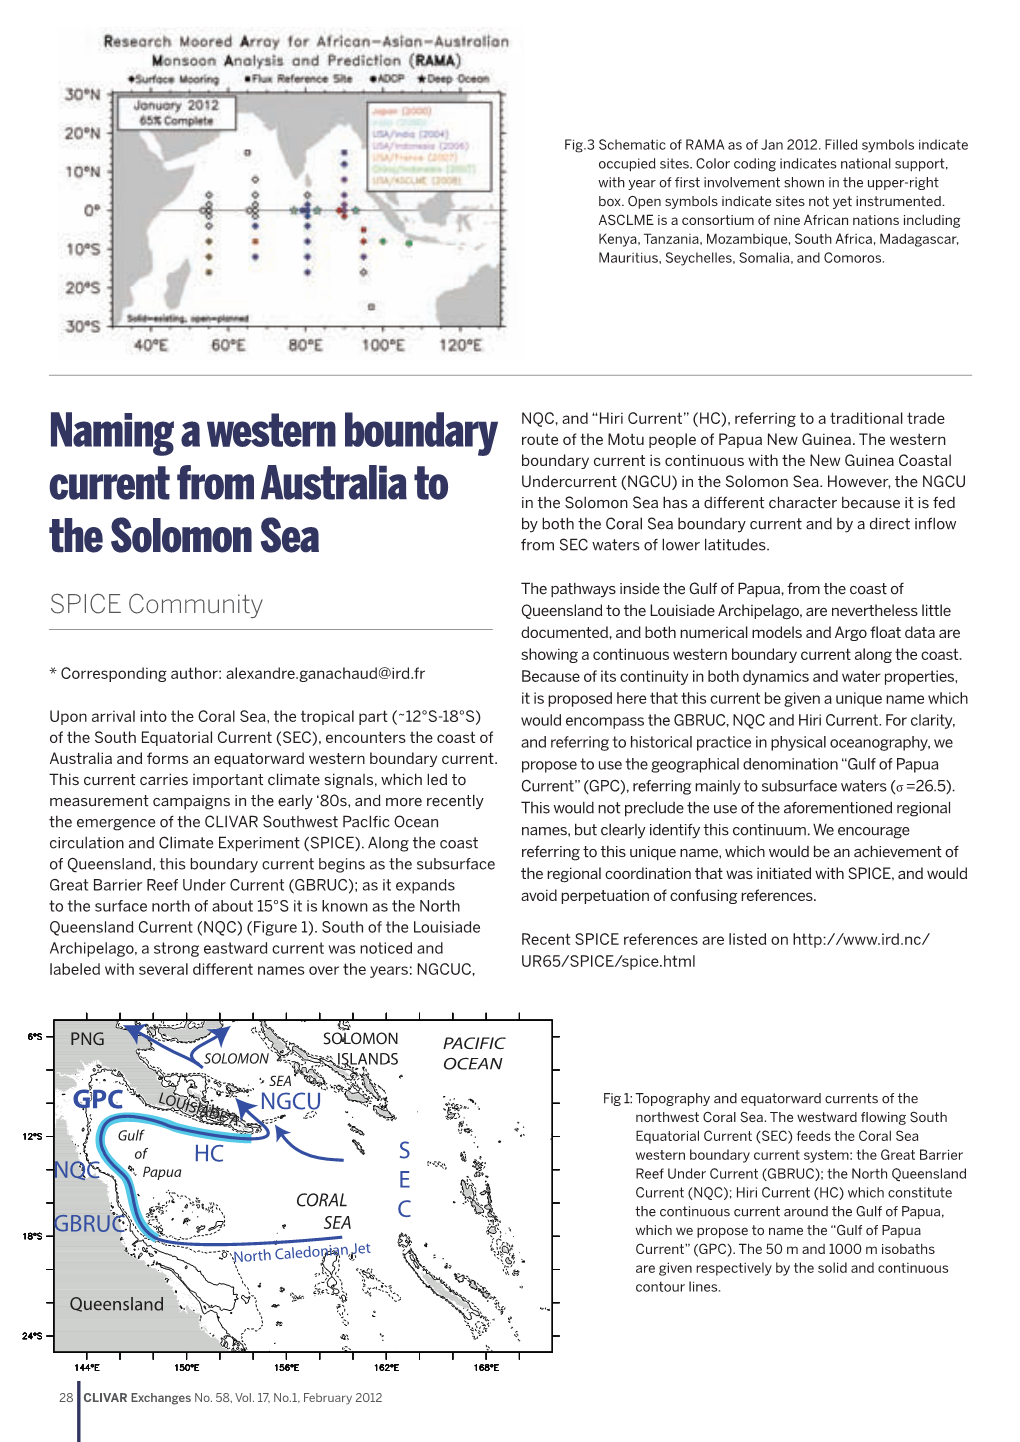 Naming a Western Boundary Current from Australia to the Solomon